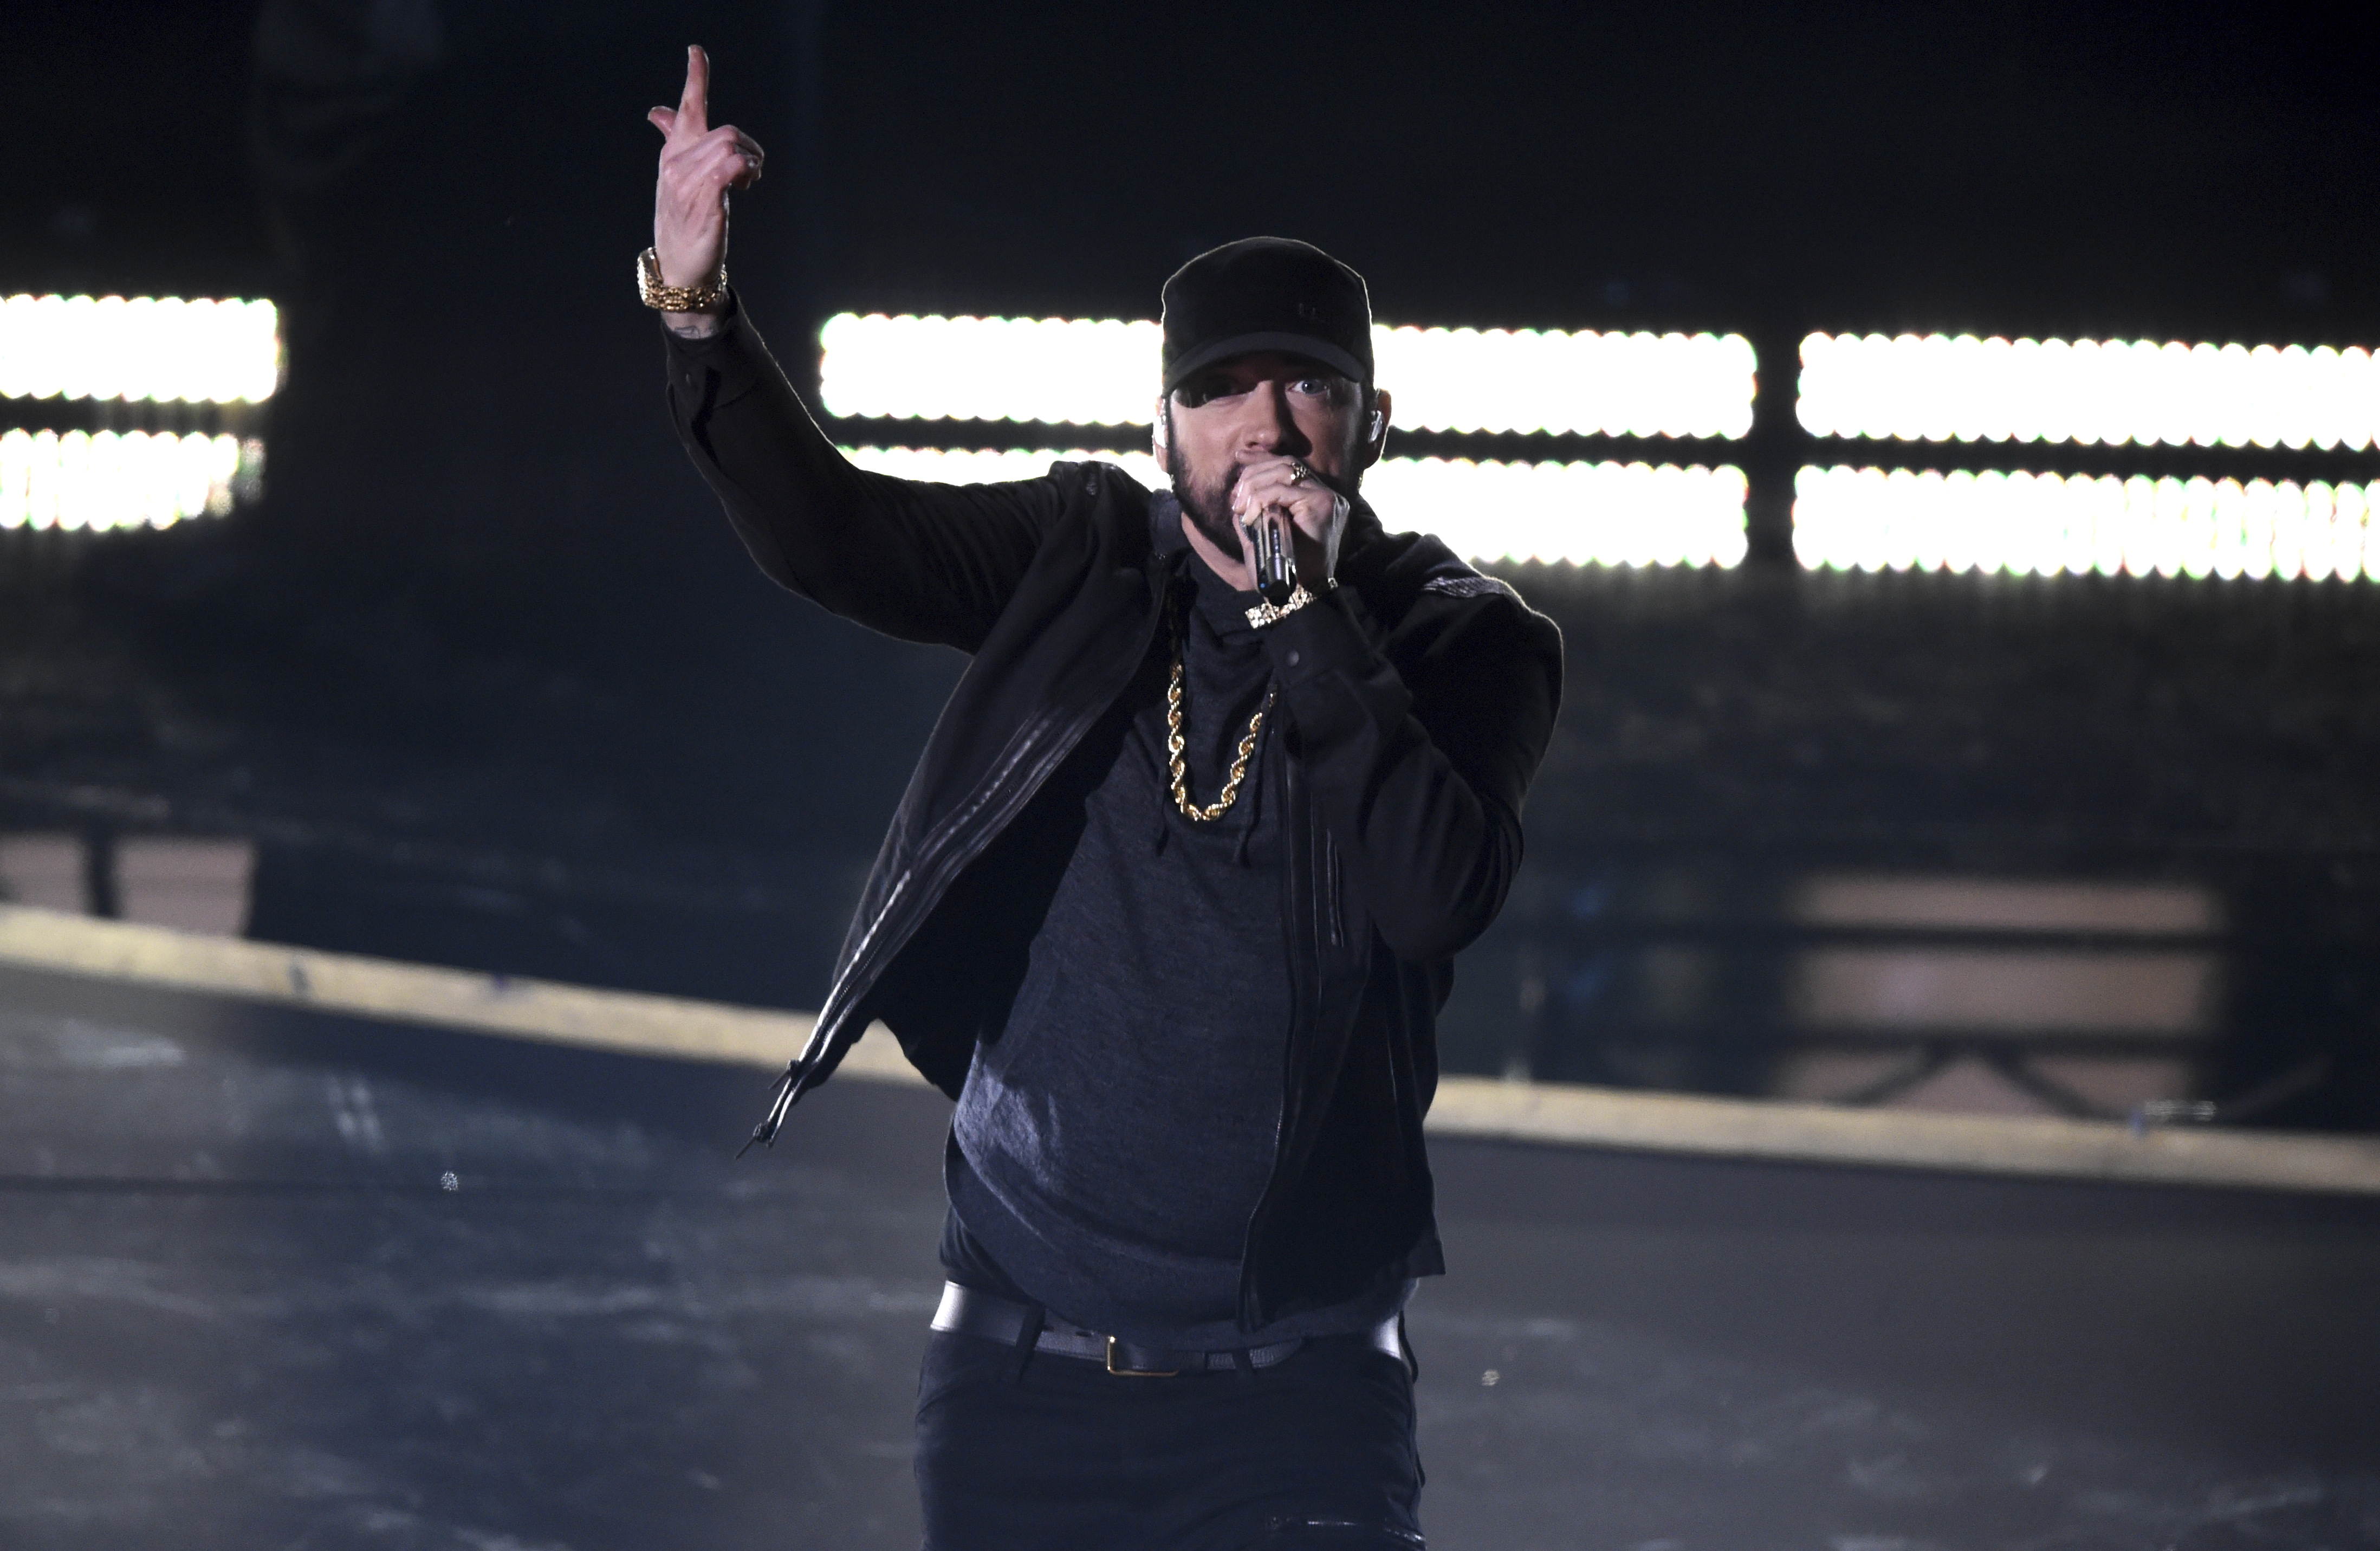 Eminem & A Live Orchestra Performed ‘Lose Yourself’ At The Oscars Like It Was 2003